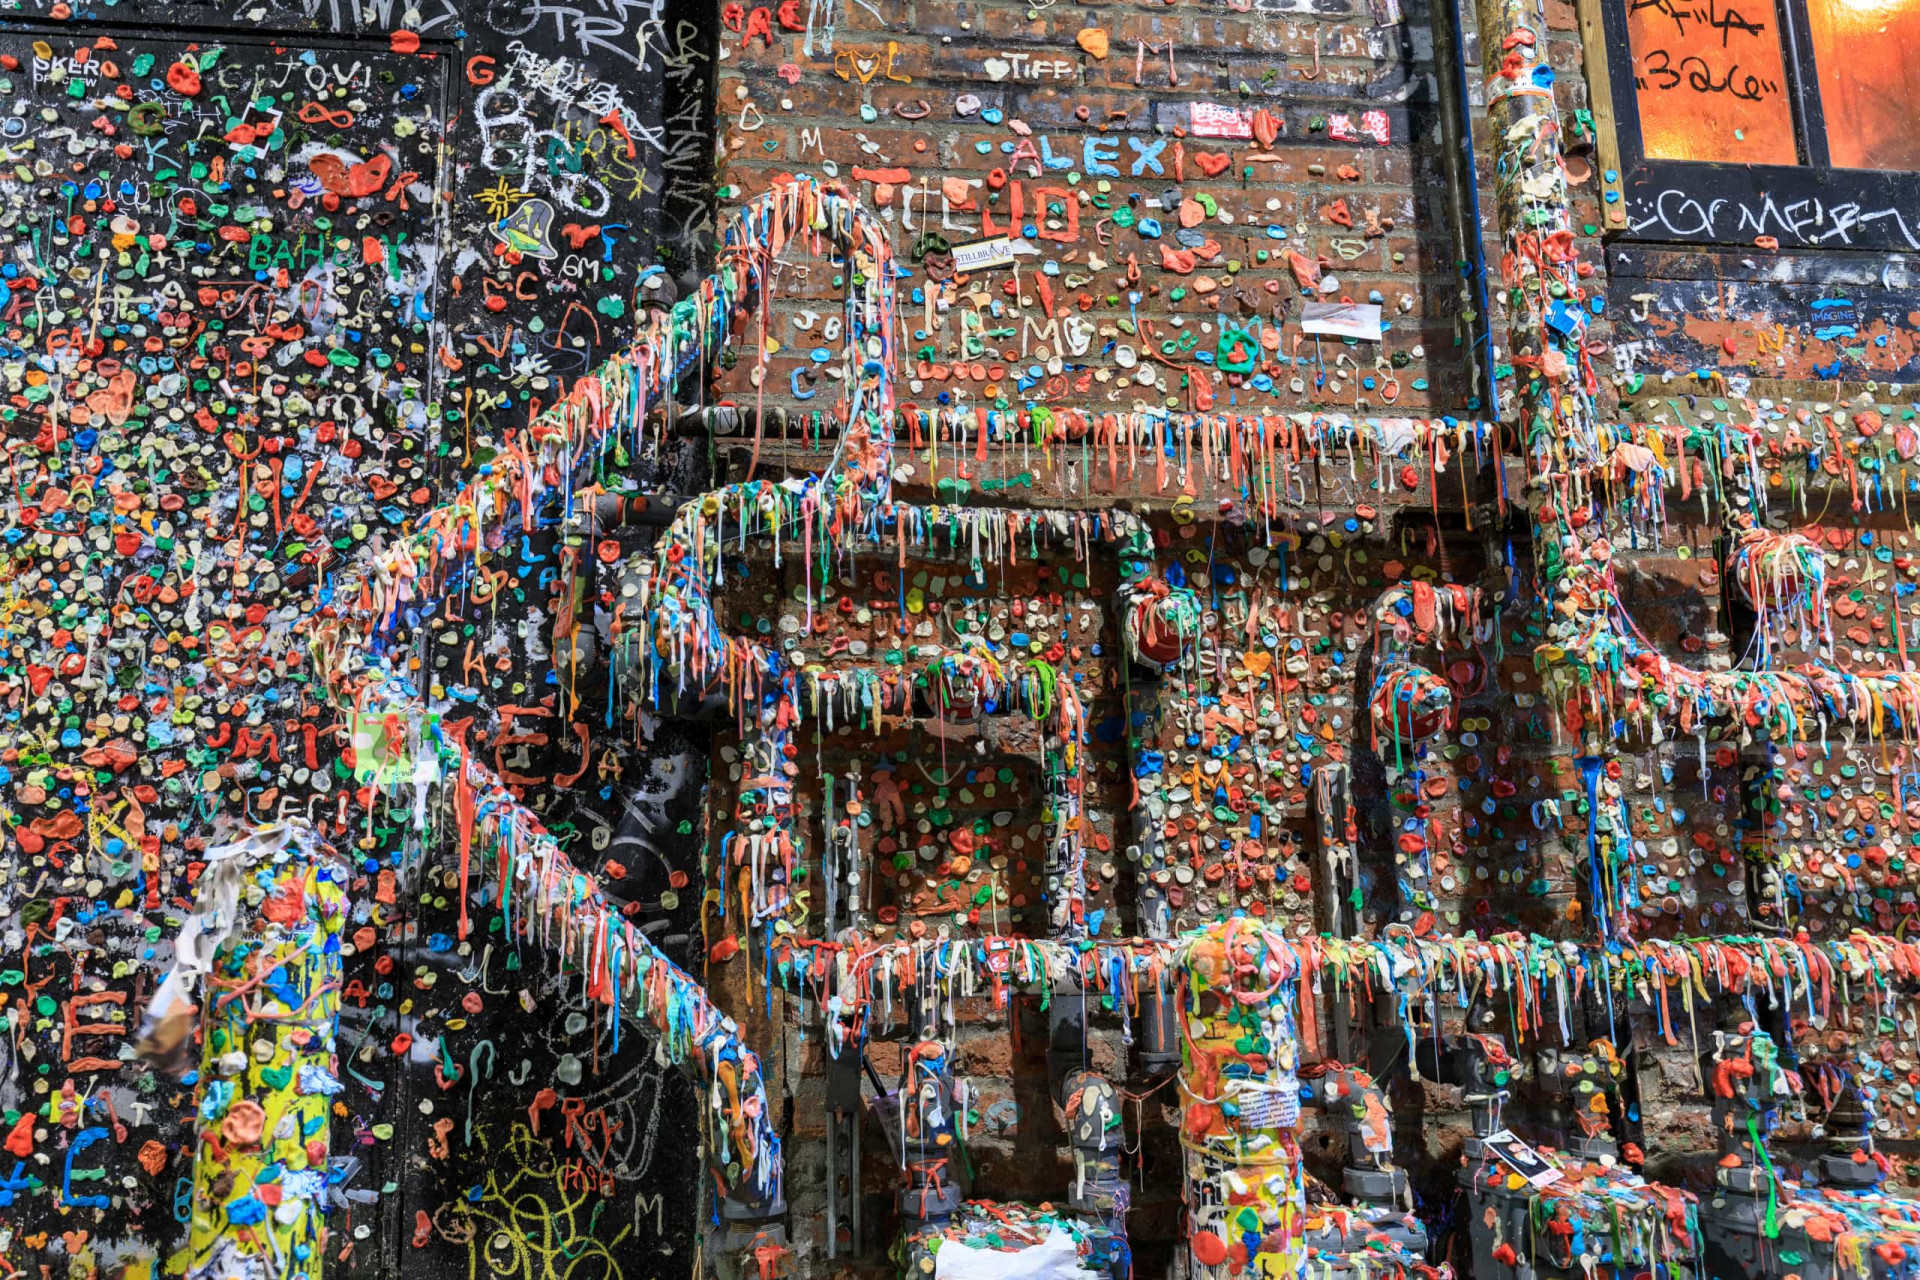 <p>One of Seattle's more unusual visitor draws, Gum Wall is a brick wall covered in used chewing gum. It's been a tourist attraction since 1999. However, controversy surrounds the local landmark, with detractors noting the erosion of the bricks due to the sugar in the gum. A clean-up operation in 2015 yielded over 1,070 kg (2,350 lbs) of gum removed and disposed of.</p><p><a href="https://www.msn.com/en-my/community/channel/vid-7xx8mnucu55yw63we9va2gwr7uihbxwc68fxqp25x6tg4ftibpra?cvid=94631541bc0f4f89bfd59158d696ad7e">Follow us and access great exclusive content every day</a></p>